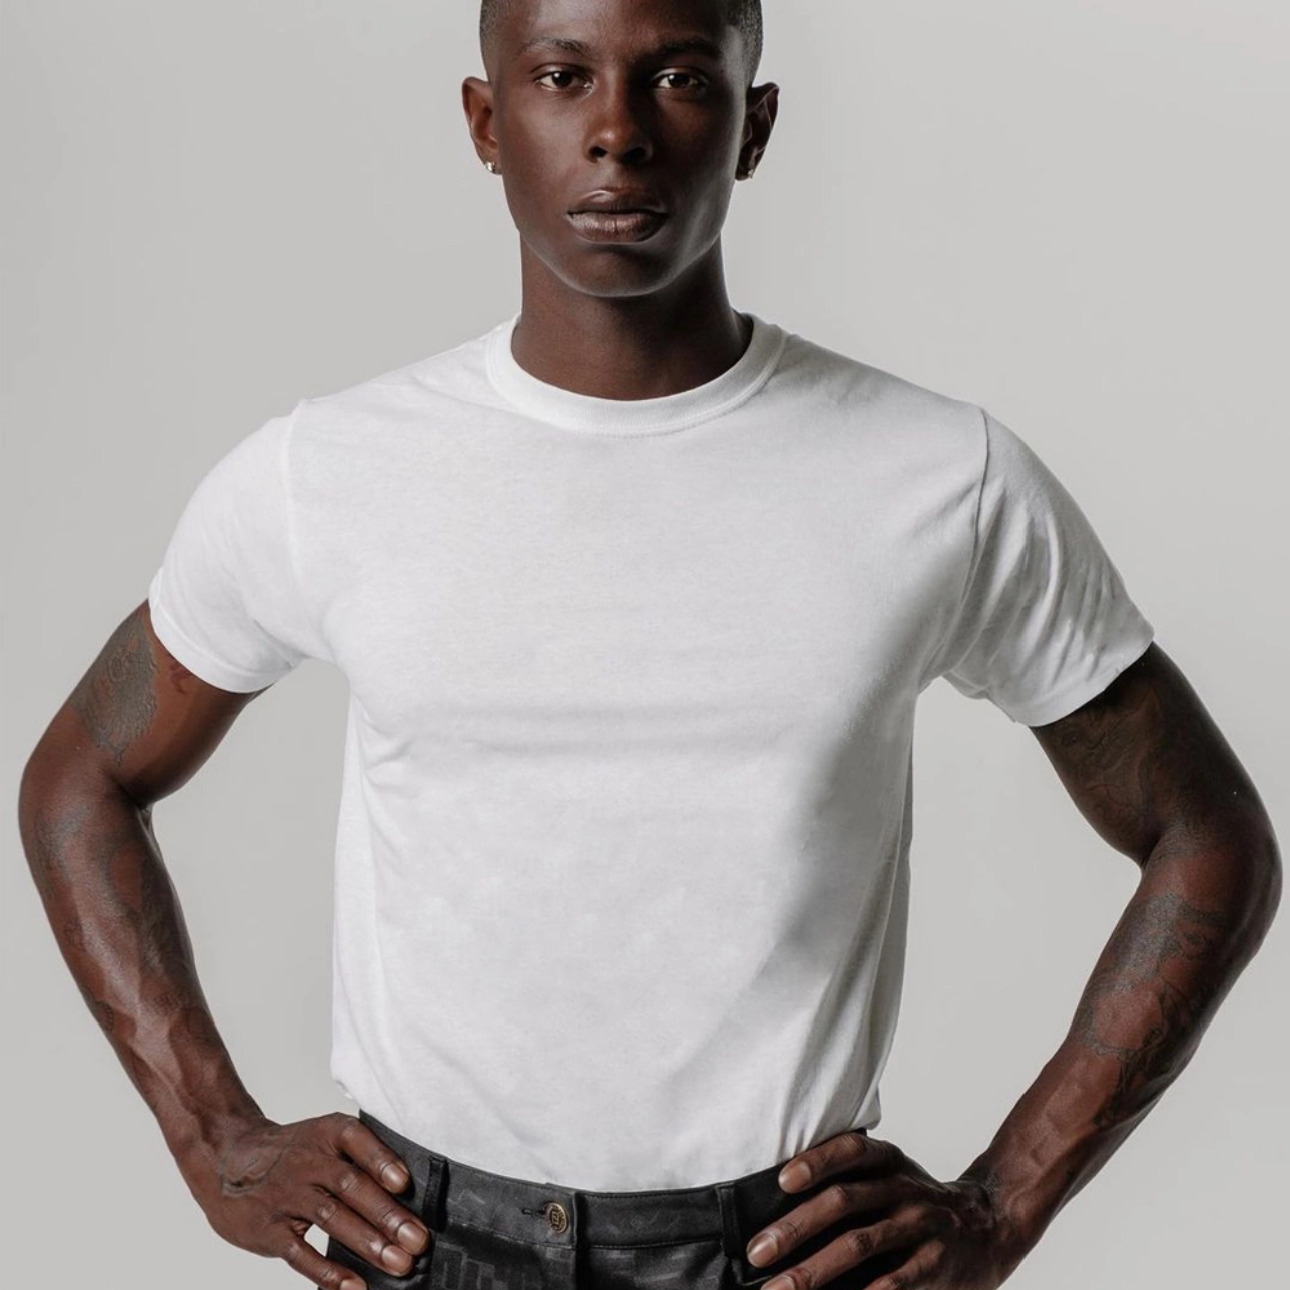 Confident male model with hands on hips wearing a plain white t-shirt and black pants, showcasing a casual yet bold look against a light grey background — A Los Angeles photography studio portfolio